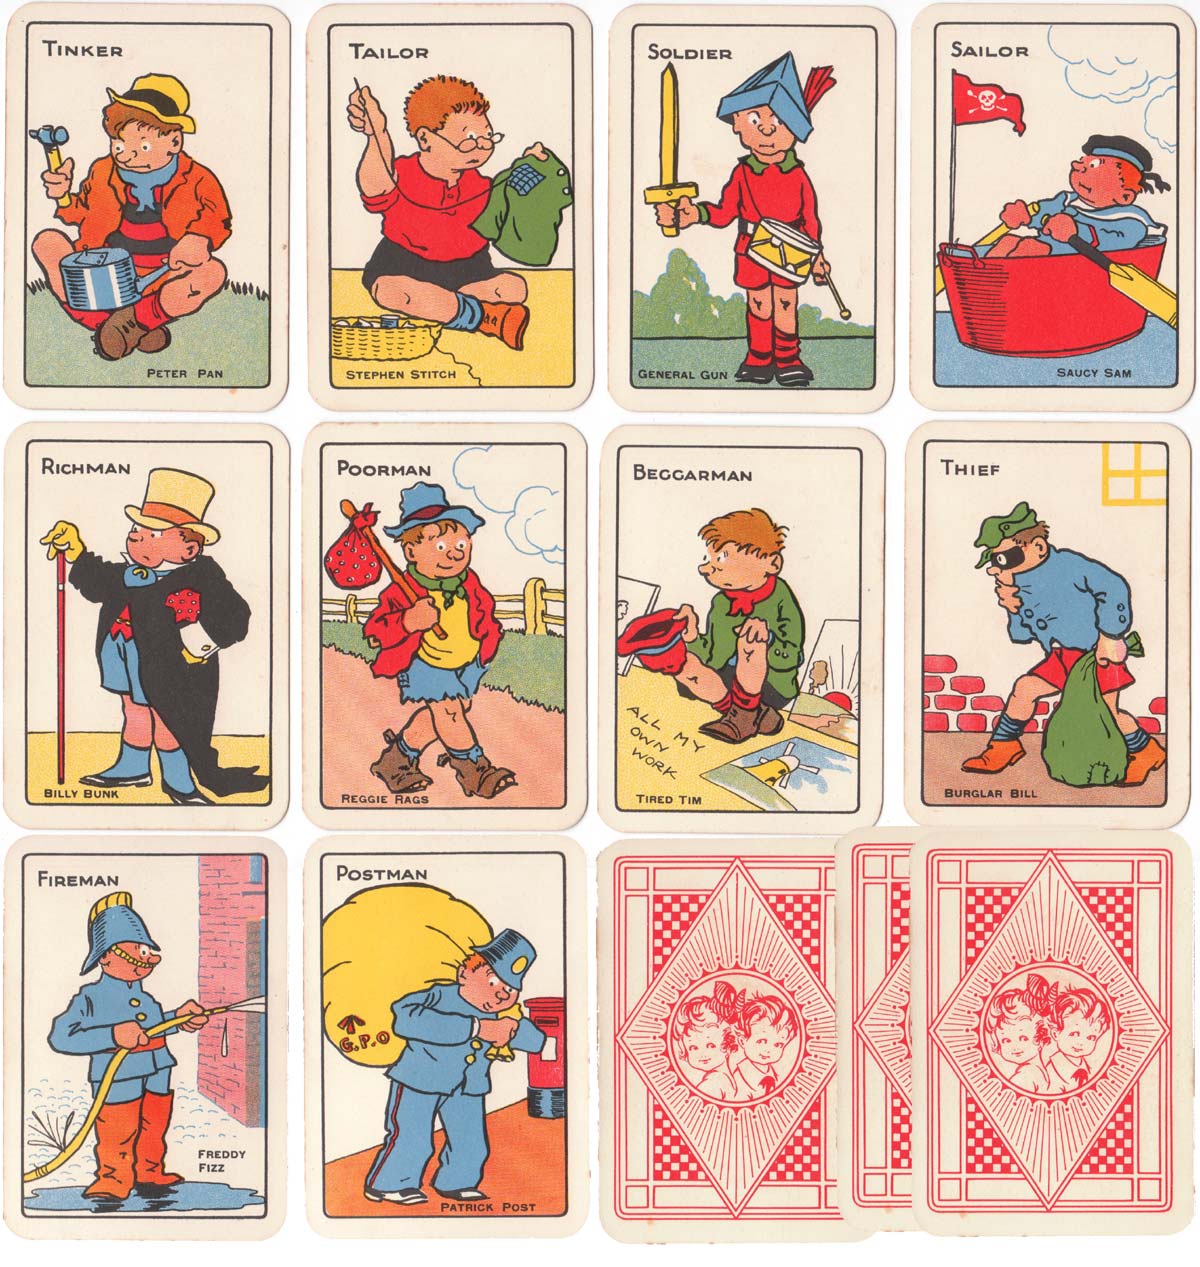 Snap card game produced in Germany by Oppenheimer und Sulzbacher, 1920s